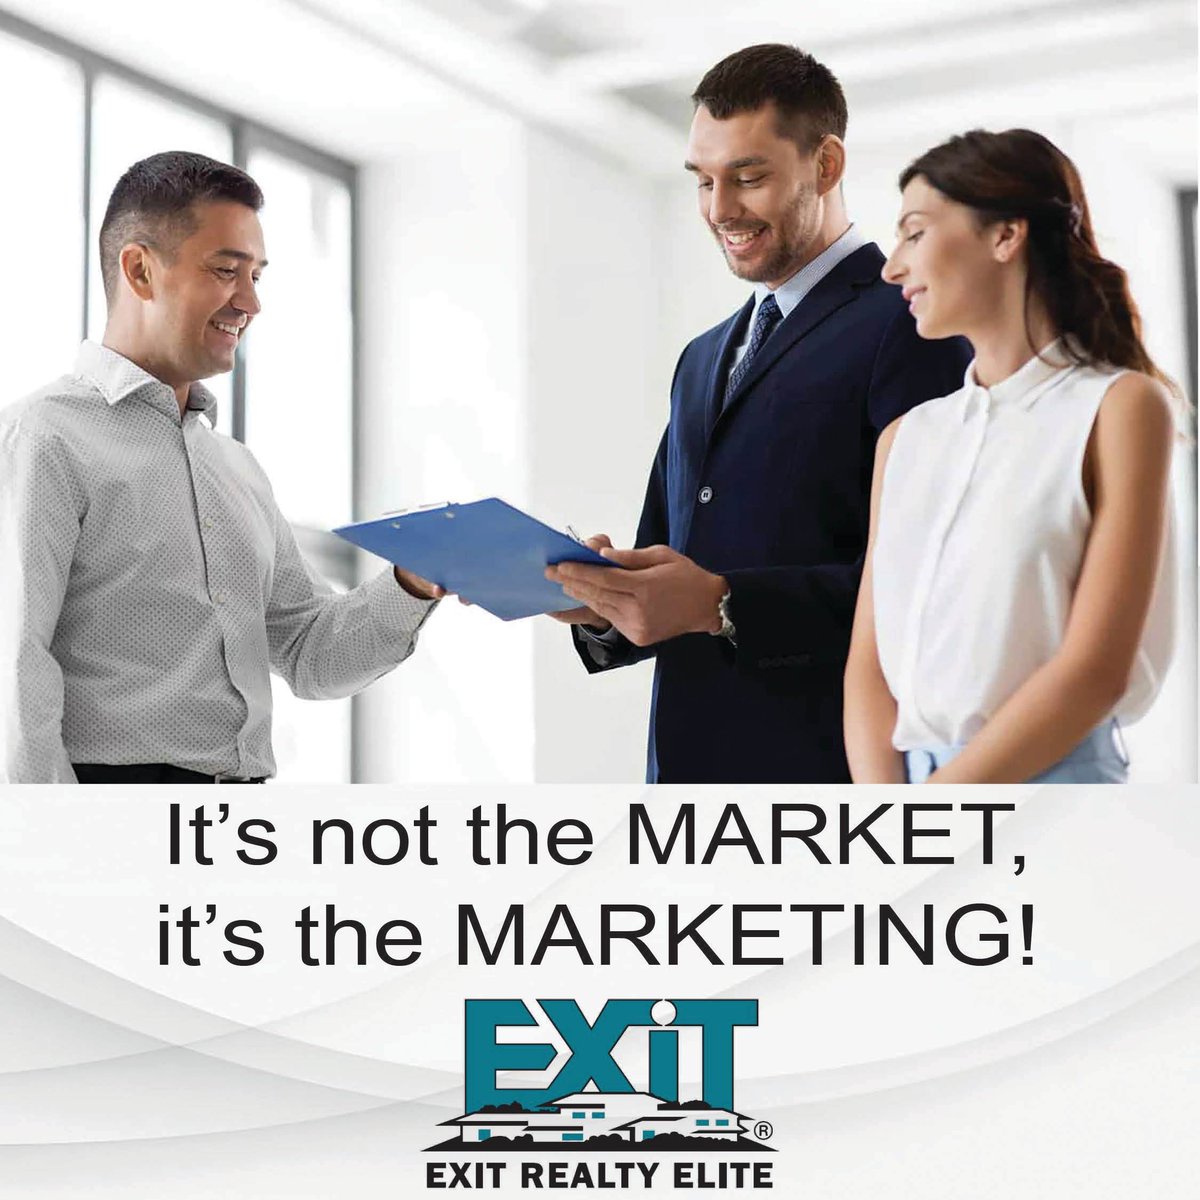 When selling your home, it's not the MARKET - it's the MARKETING!
EXIT Realty Elite has agents ready to help you - call us today!

#InvestinNashville #MakeItYourOwn #RealtorToTheStars #ImSold #ThinkSmartThinkEXIT #EXITinTheGulch #ListwithEXIT #MusicCity #DowntownNashville...